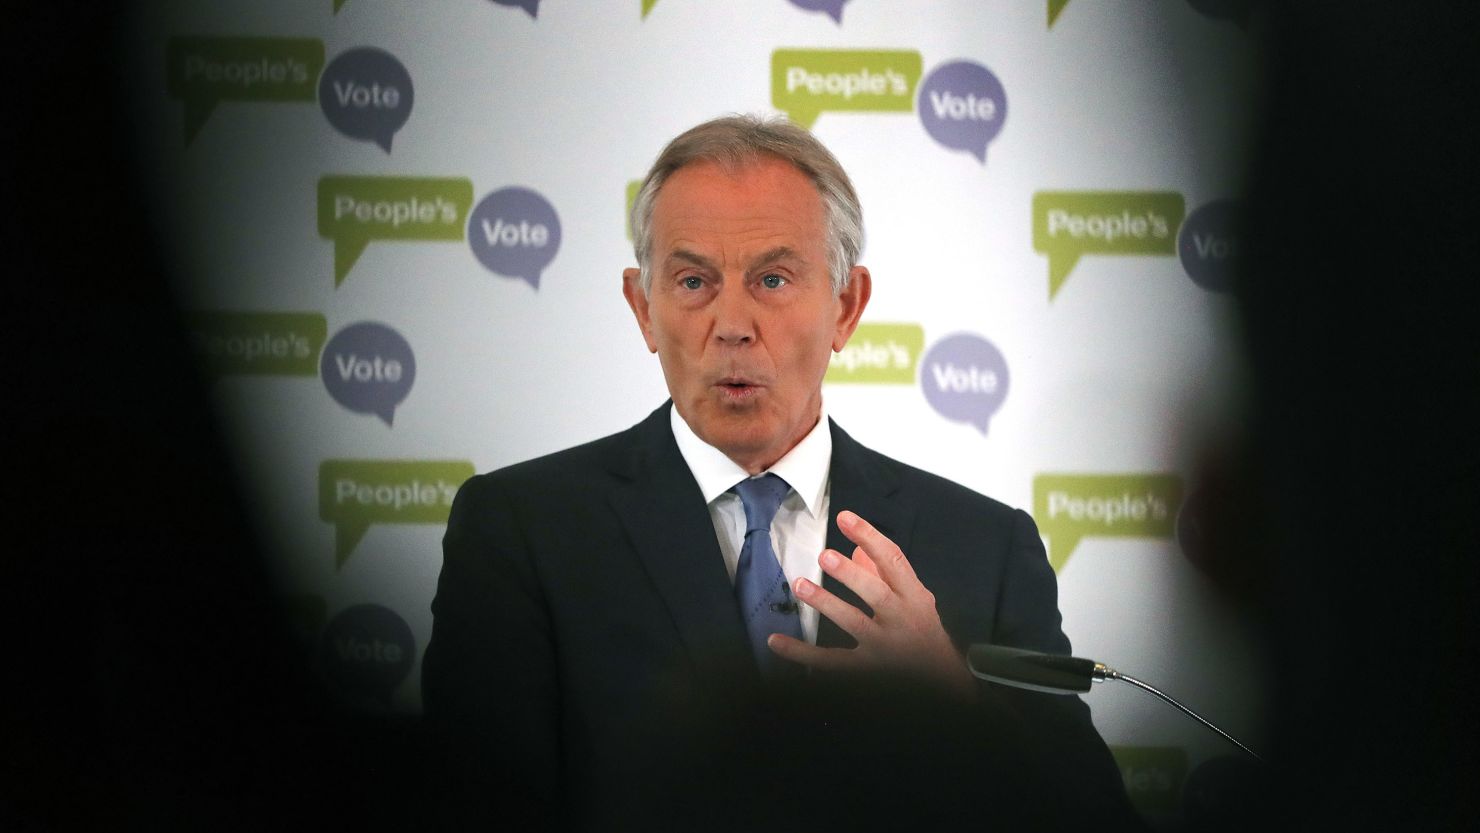 Tony Blair advocated a new referendum at a speech at the British Academy in London.